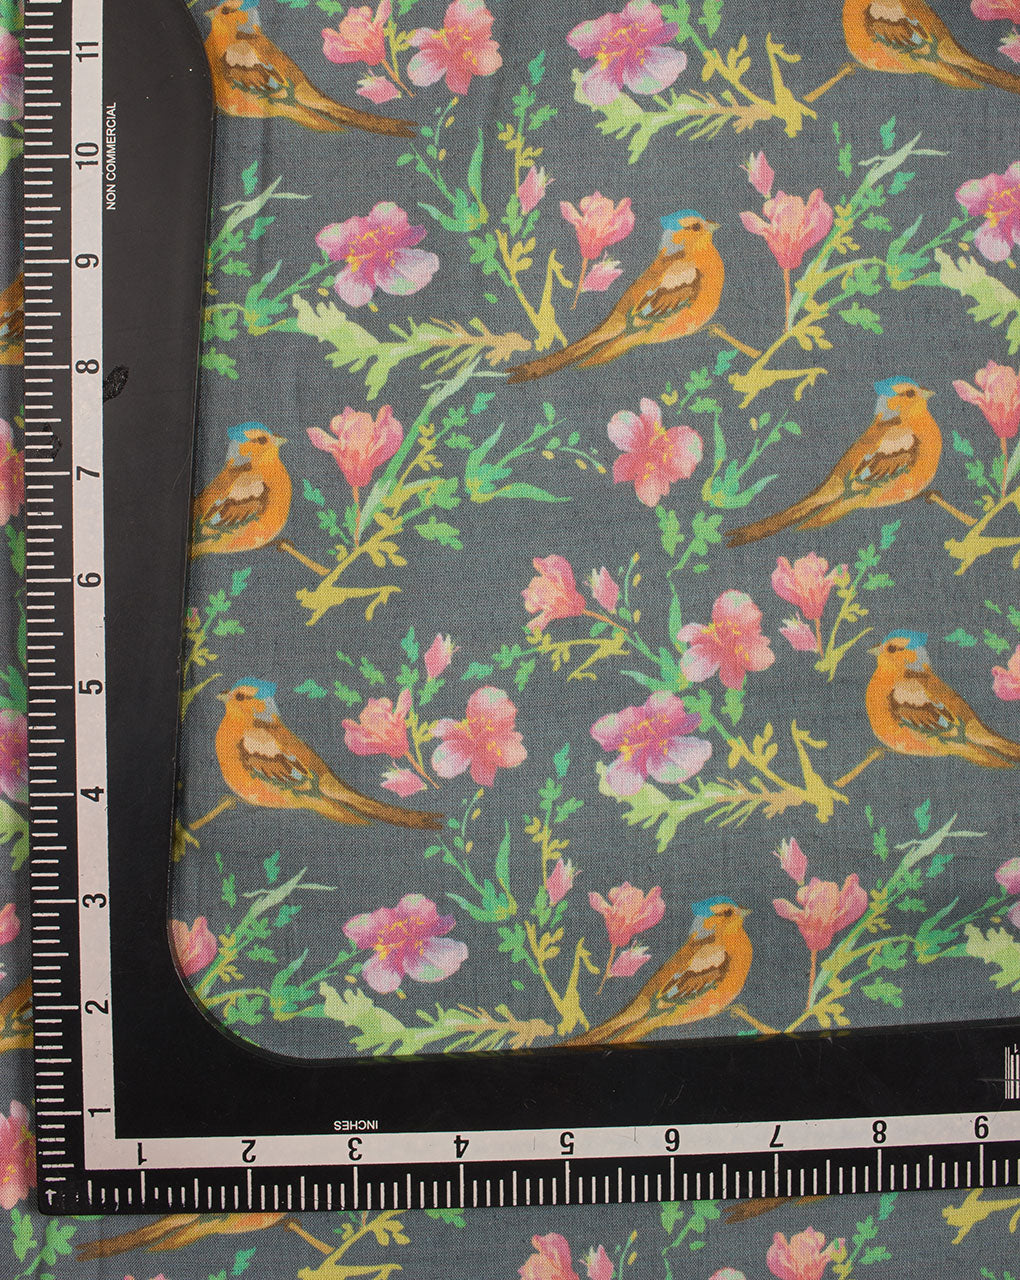 Floral Digital Print Certified Antimicrobial Rayon Fabric - Fabriclore.com